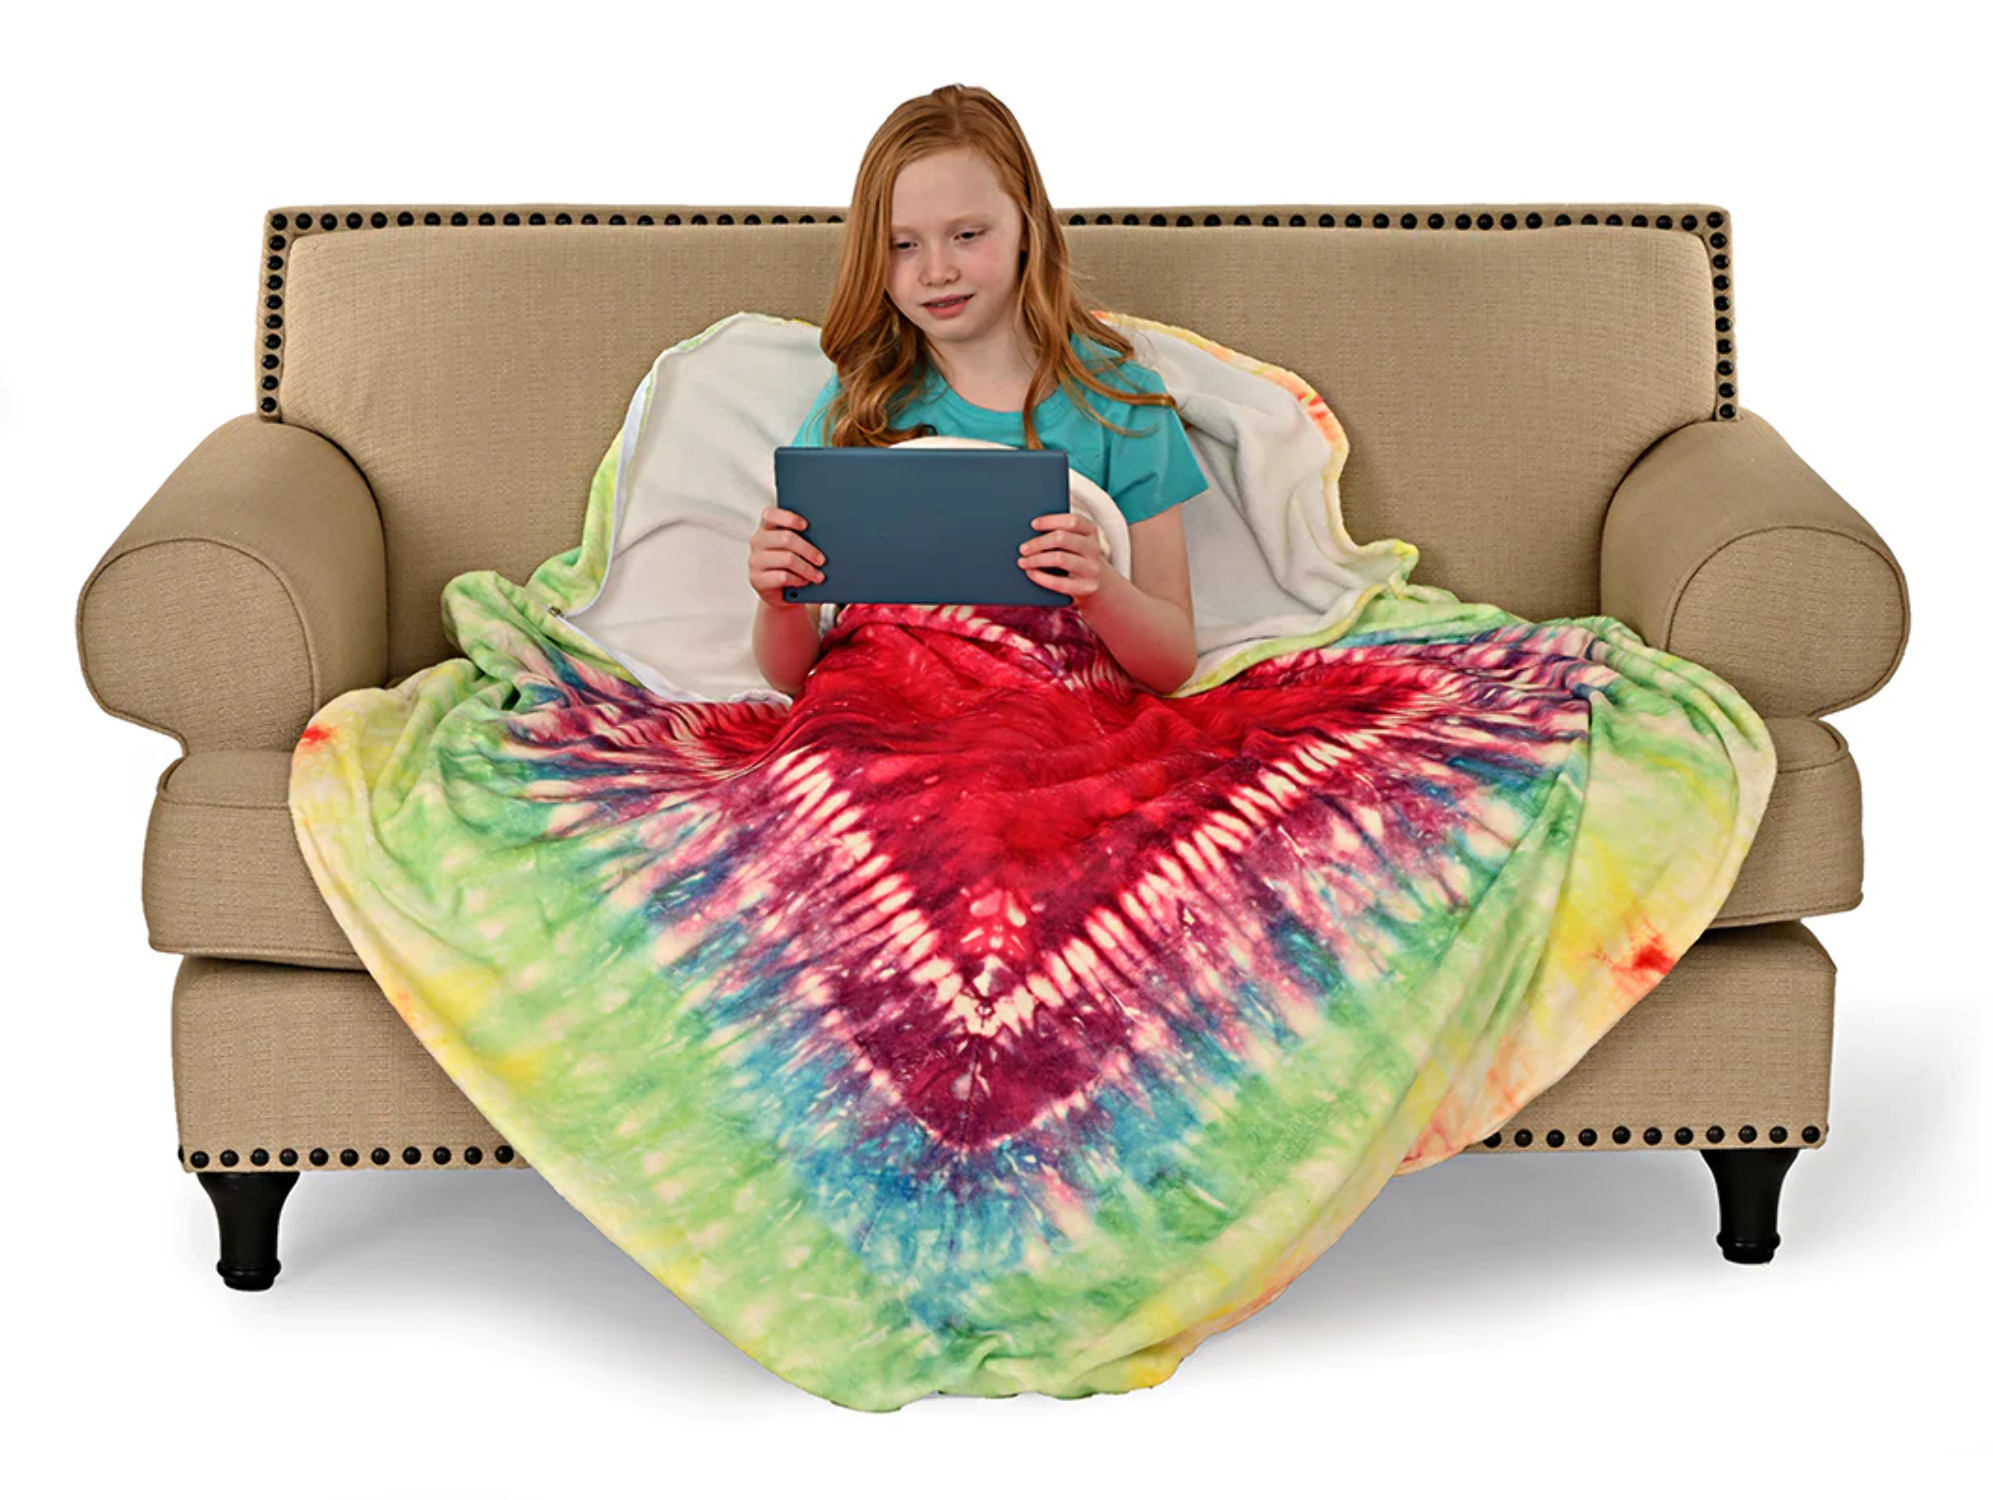 Heart Tie Dye Round Sleeping Bag Blanket 60" Diameter - Cozy Warm Flannel - Novelty Circle Throw Blanket Unique & Fun Love Blanket - Perfect for Kids, Perfect for Birthday Gift - image 2 of 5